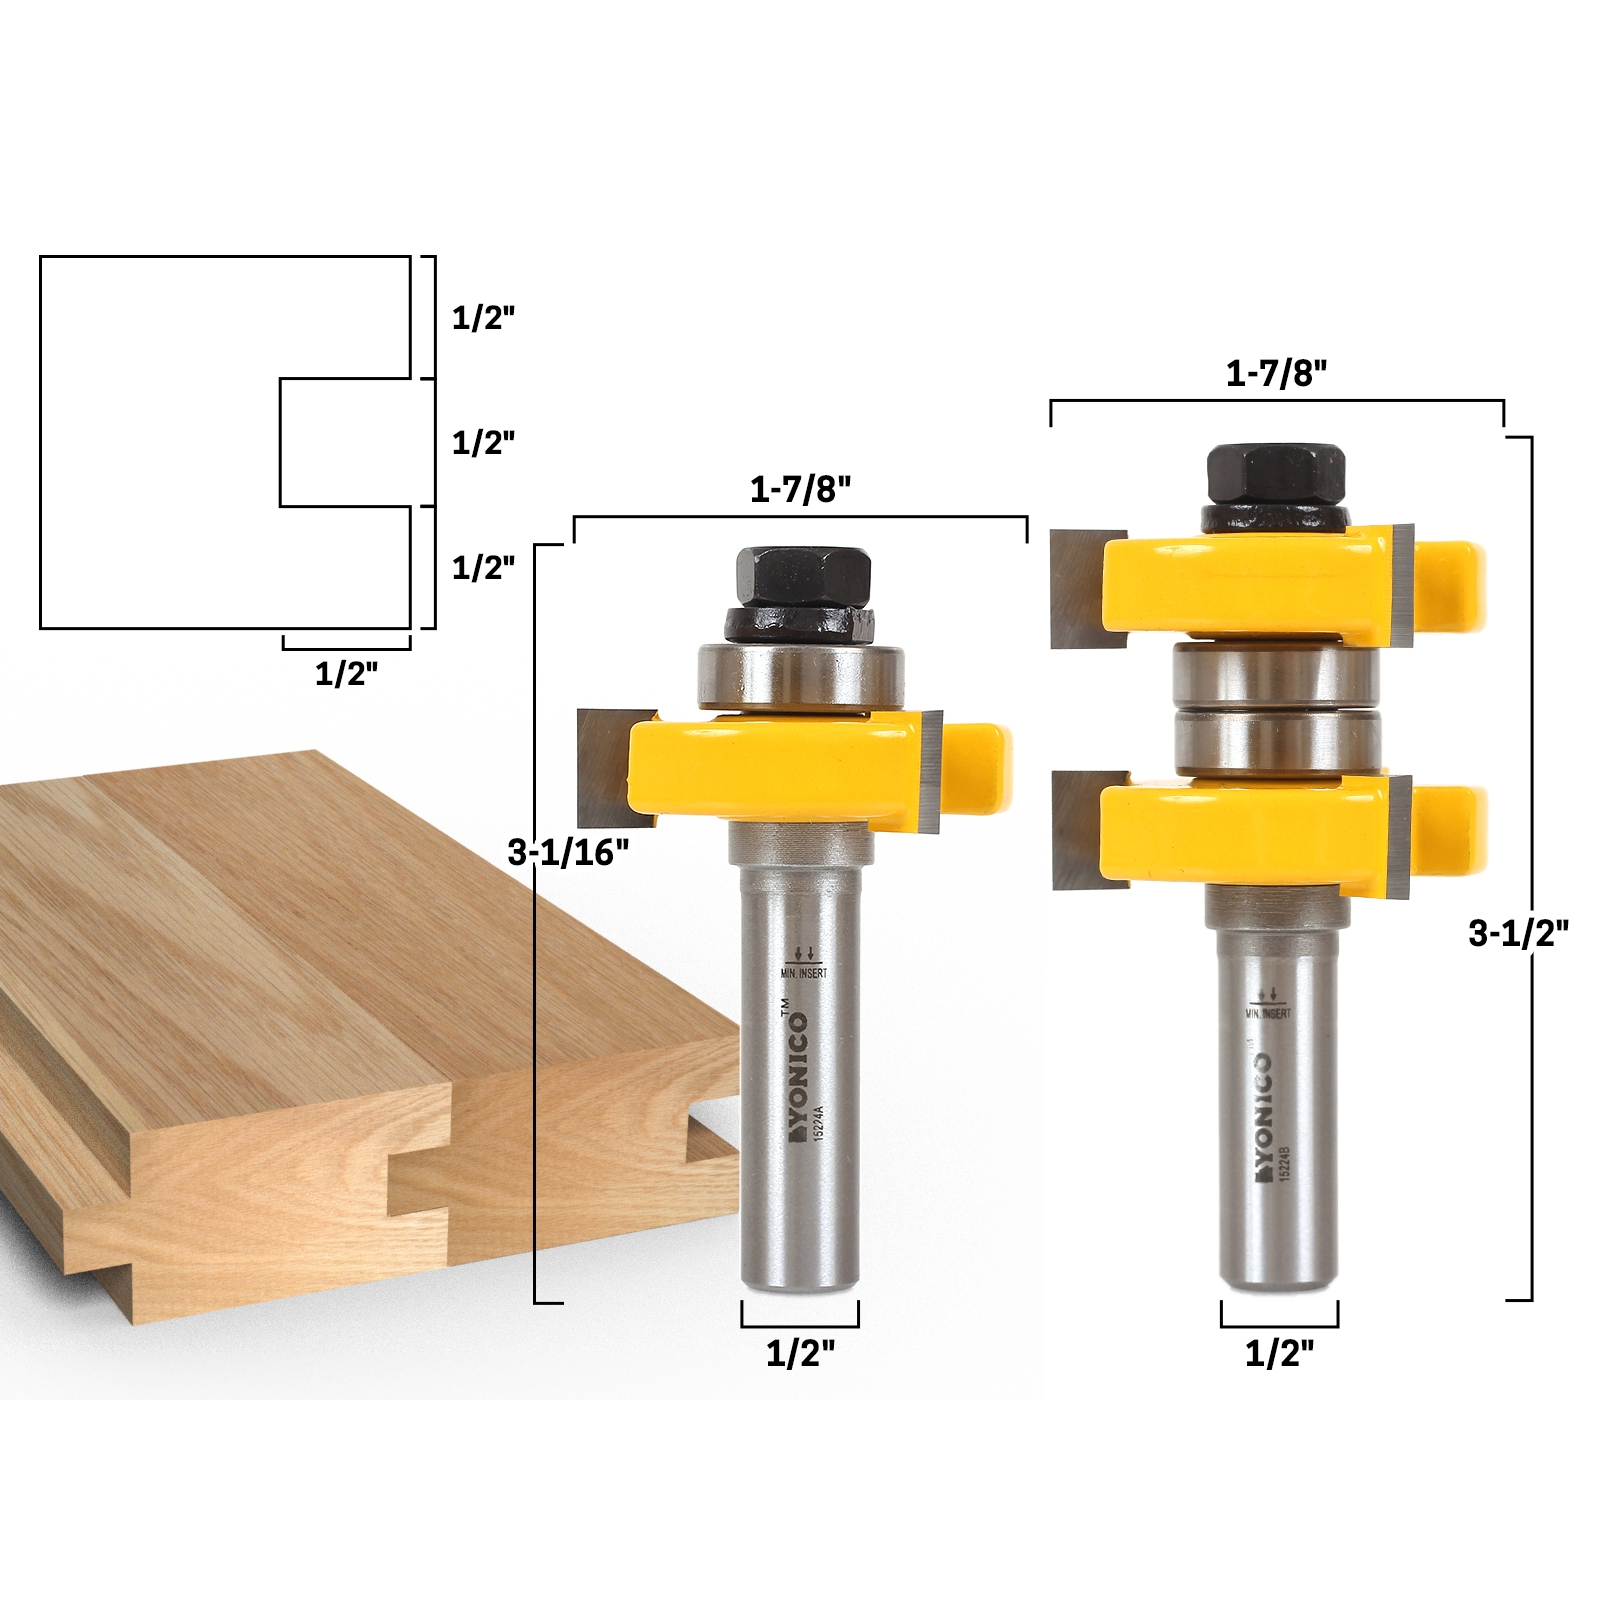 Tongue & Groove Router Bits - 1-1/2 Stock - 1/2 Shank - Yonico 15224